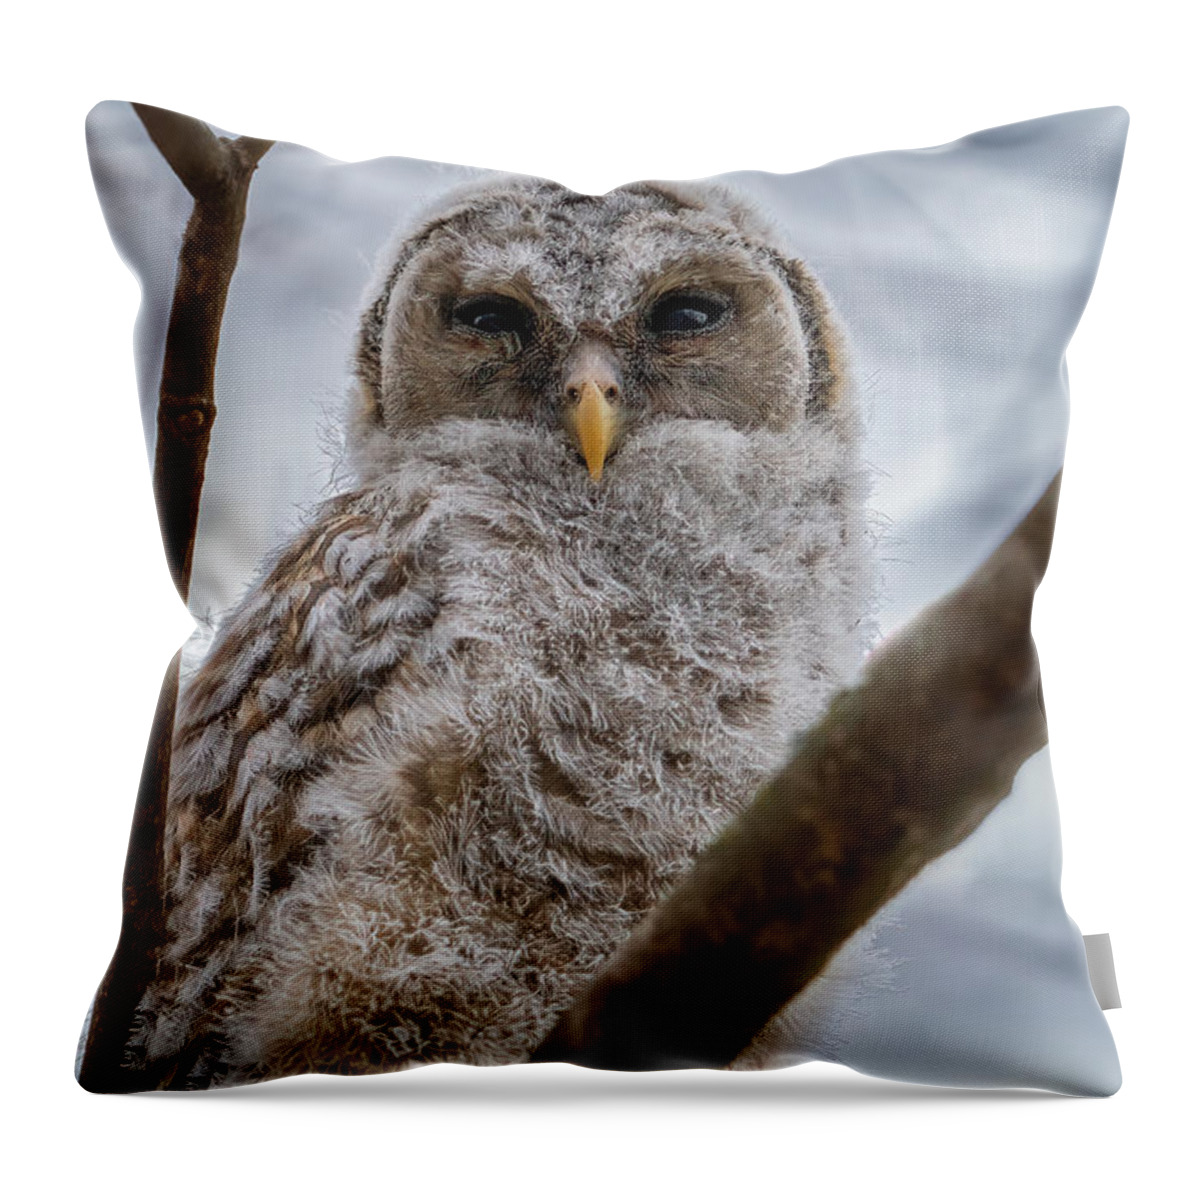 Owl Throw Pillow featuring the photograph Barred Baby by Brad Bellisle